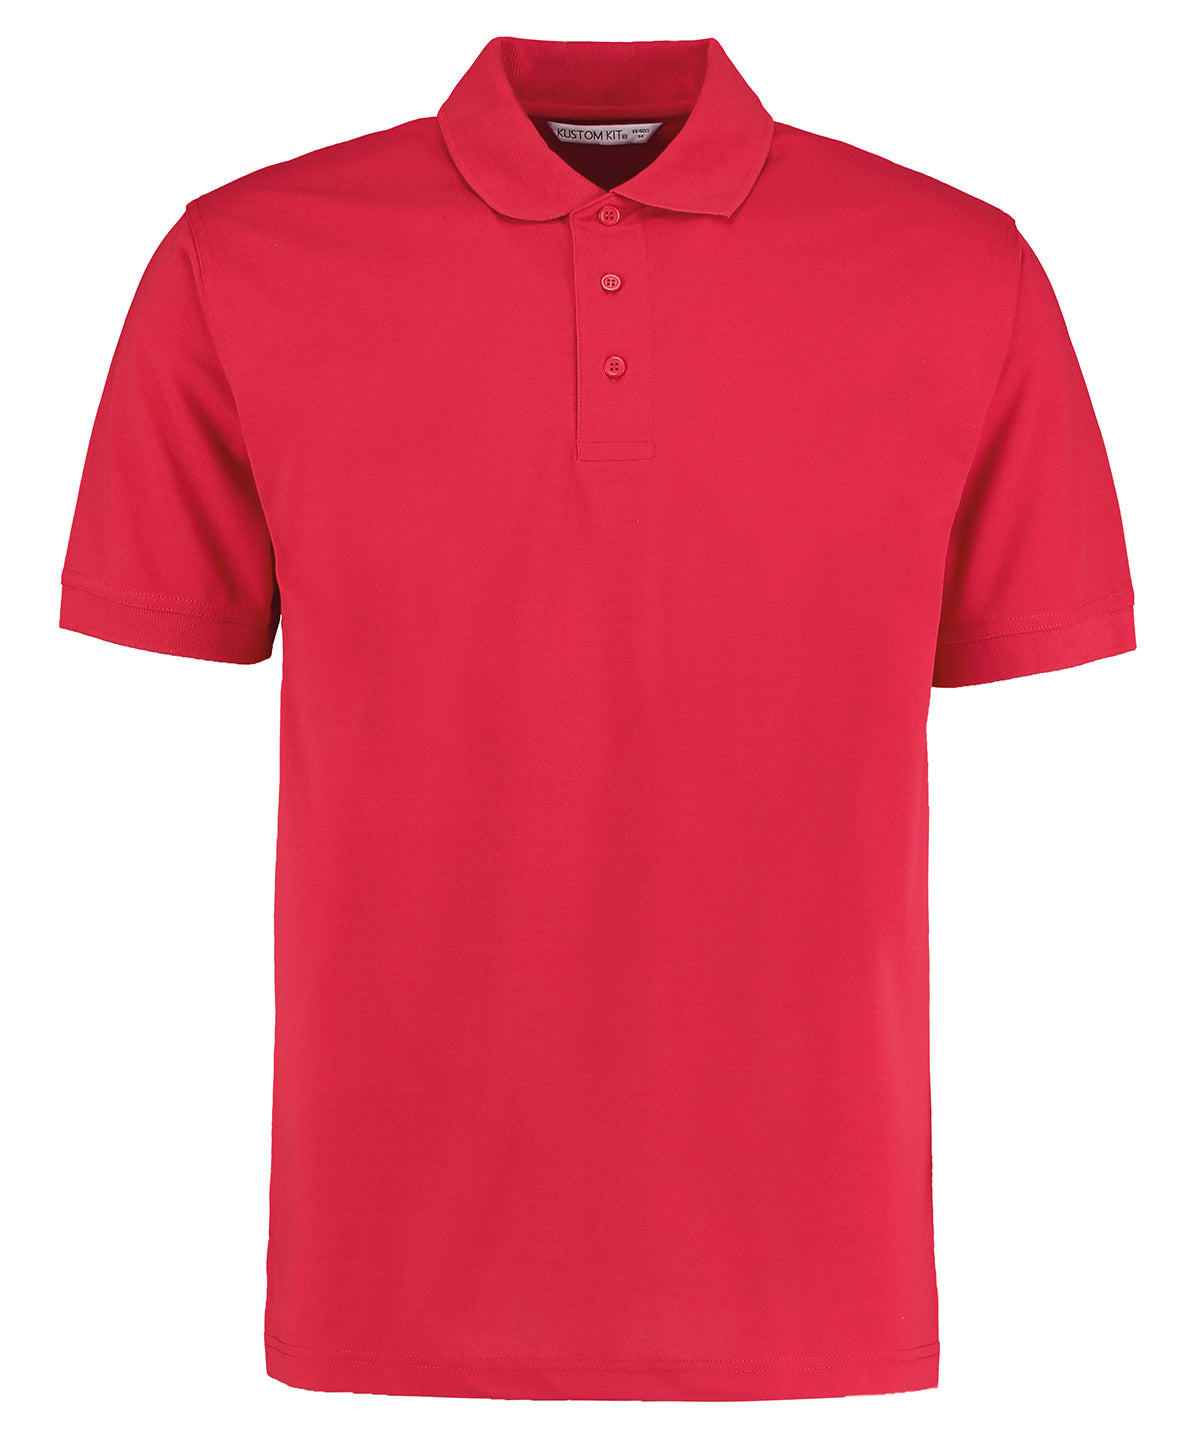 Personalised Polo Shirts - Mid Red Kustom Kit Klassic polo with Superwash® 60°C (classic fit)